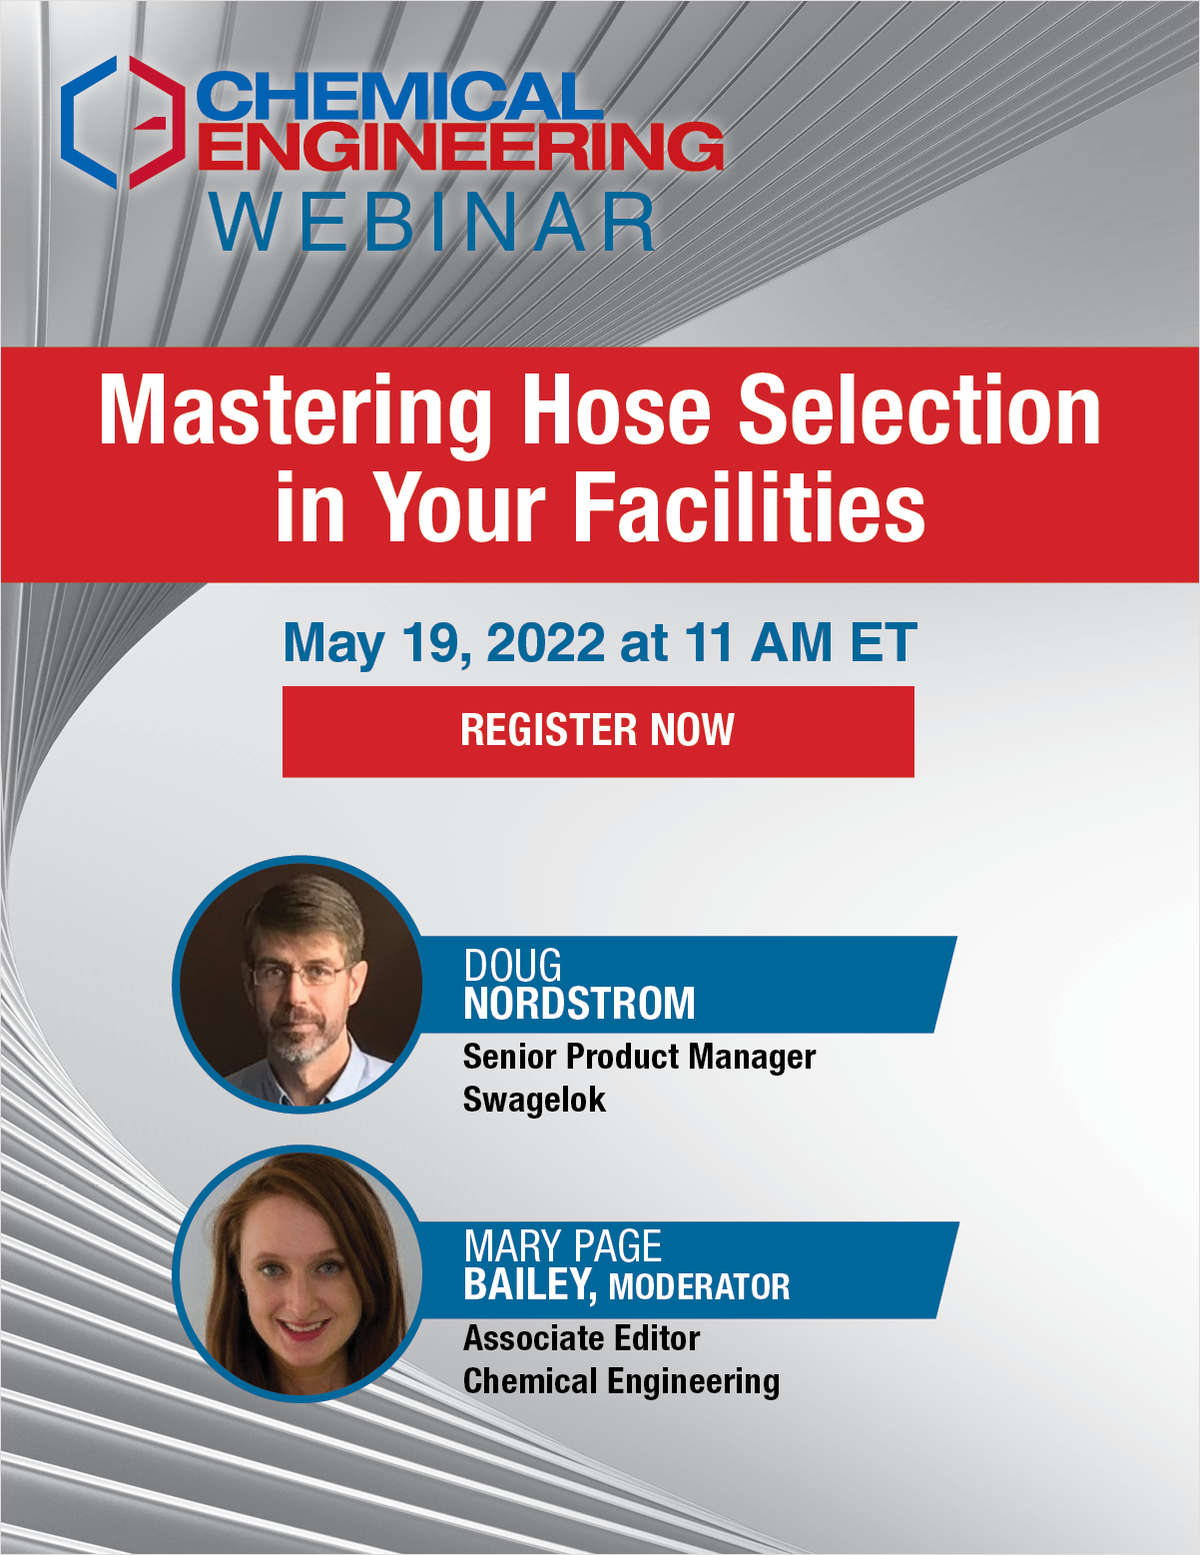 Mastering Hose Selection in Your Facilities